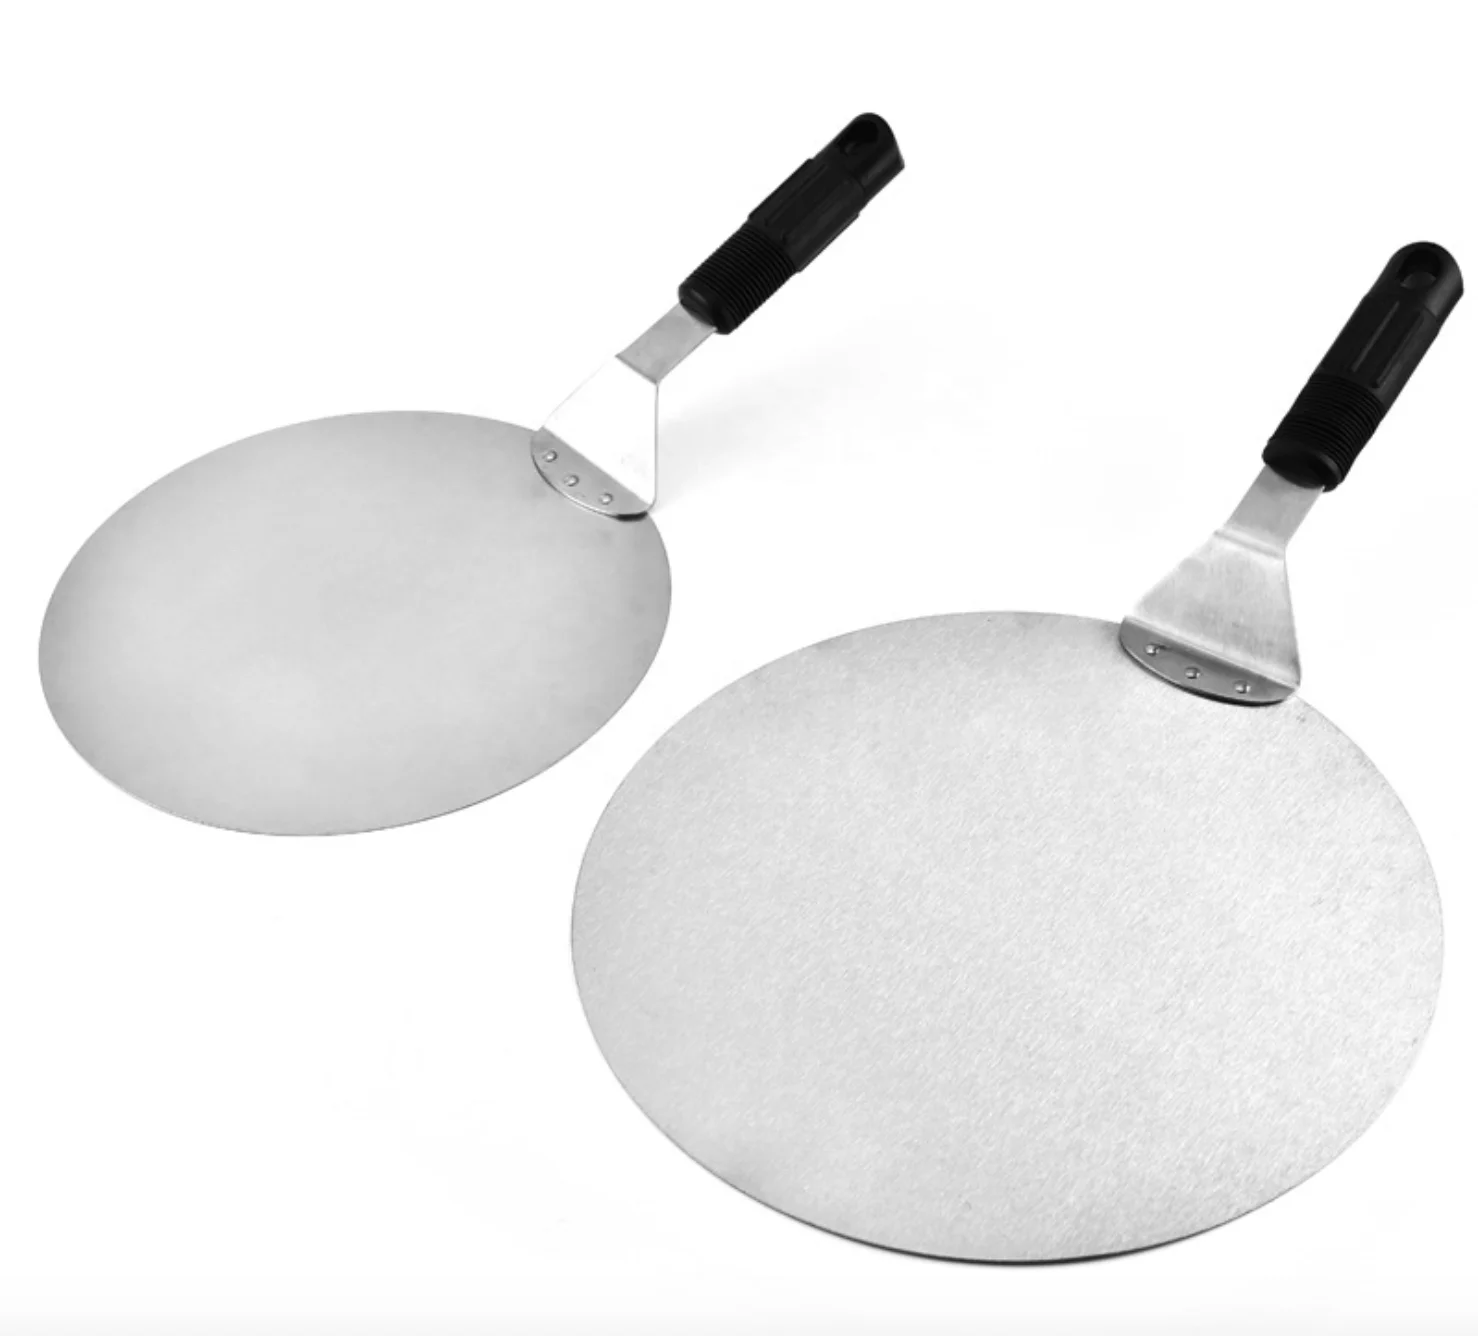 Airlove Stainless Steel Pizza Shovel Paddle Cake Shovel Baking Tools Grip Handle Ideal for baking on Pizza Stone Oven Grill 